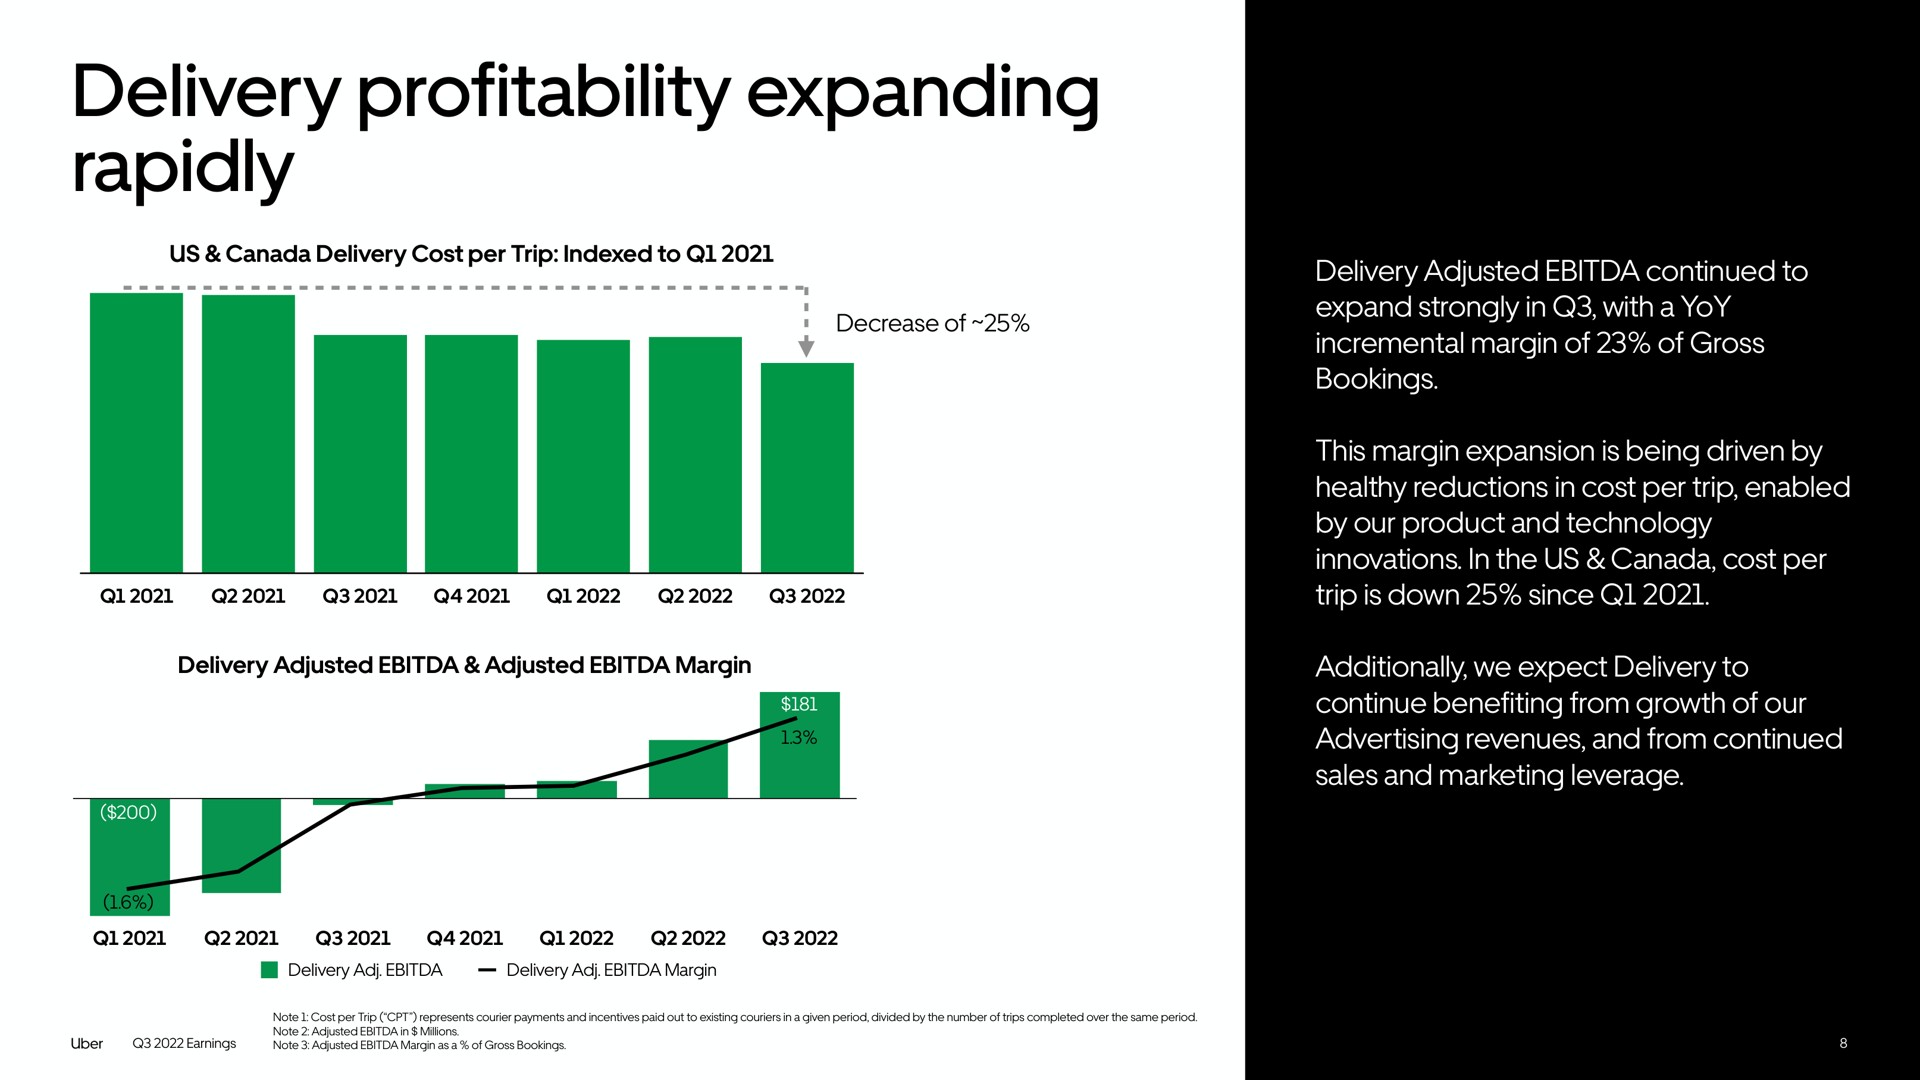 delivery profitability expanding rapidly | Uber